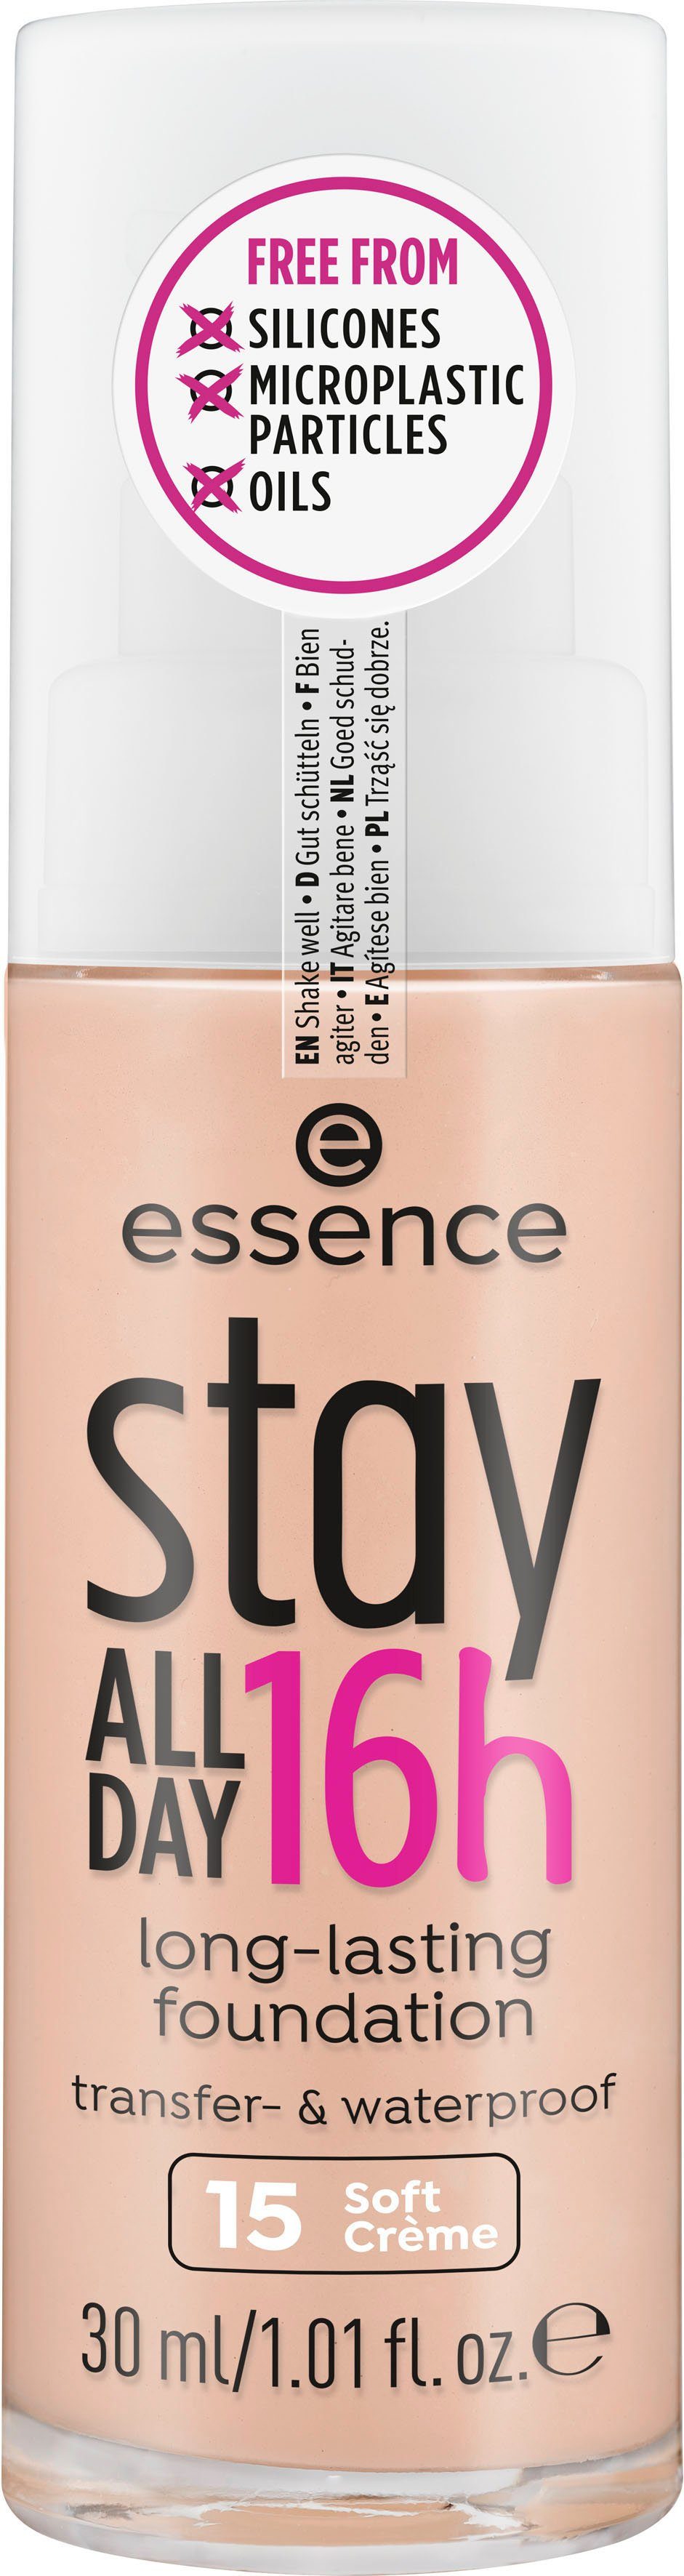 Foundation ALL 16h Essence Creme stay DAY long-lasting, 3-tlg. Soft